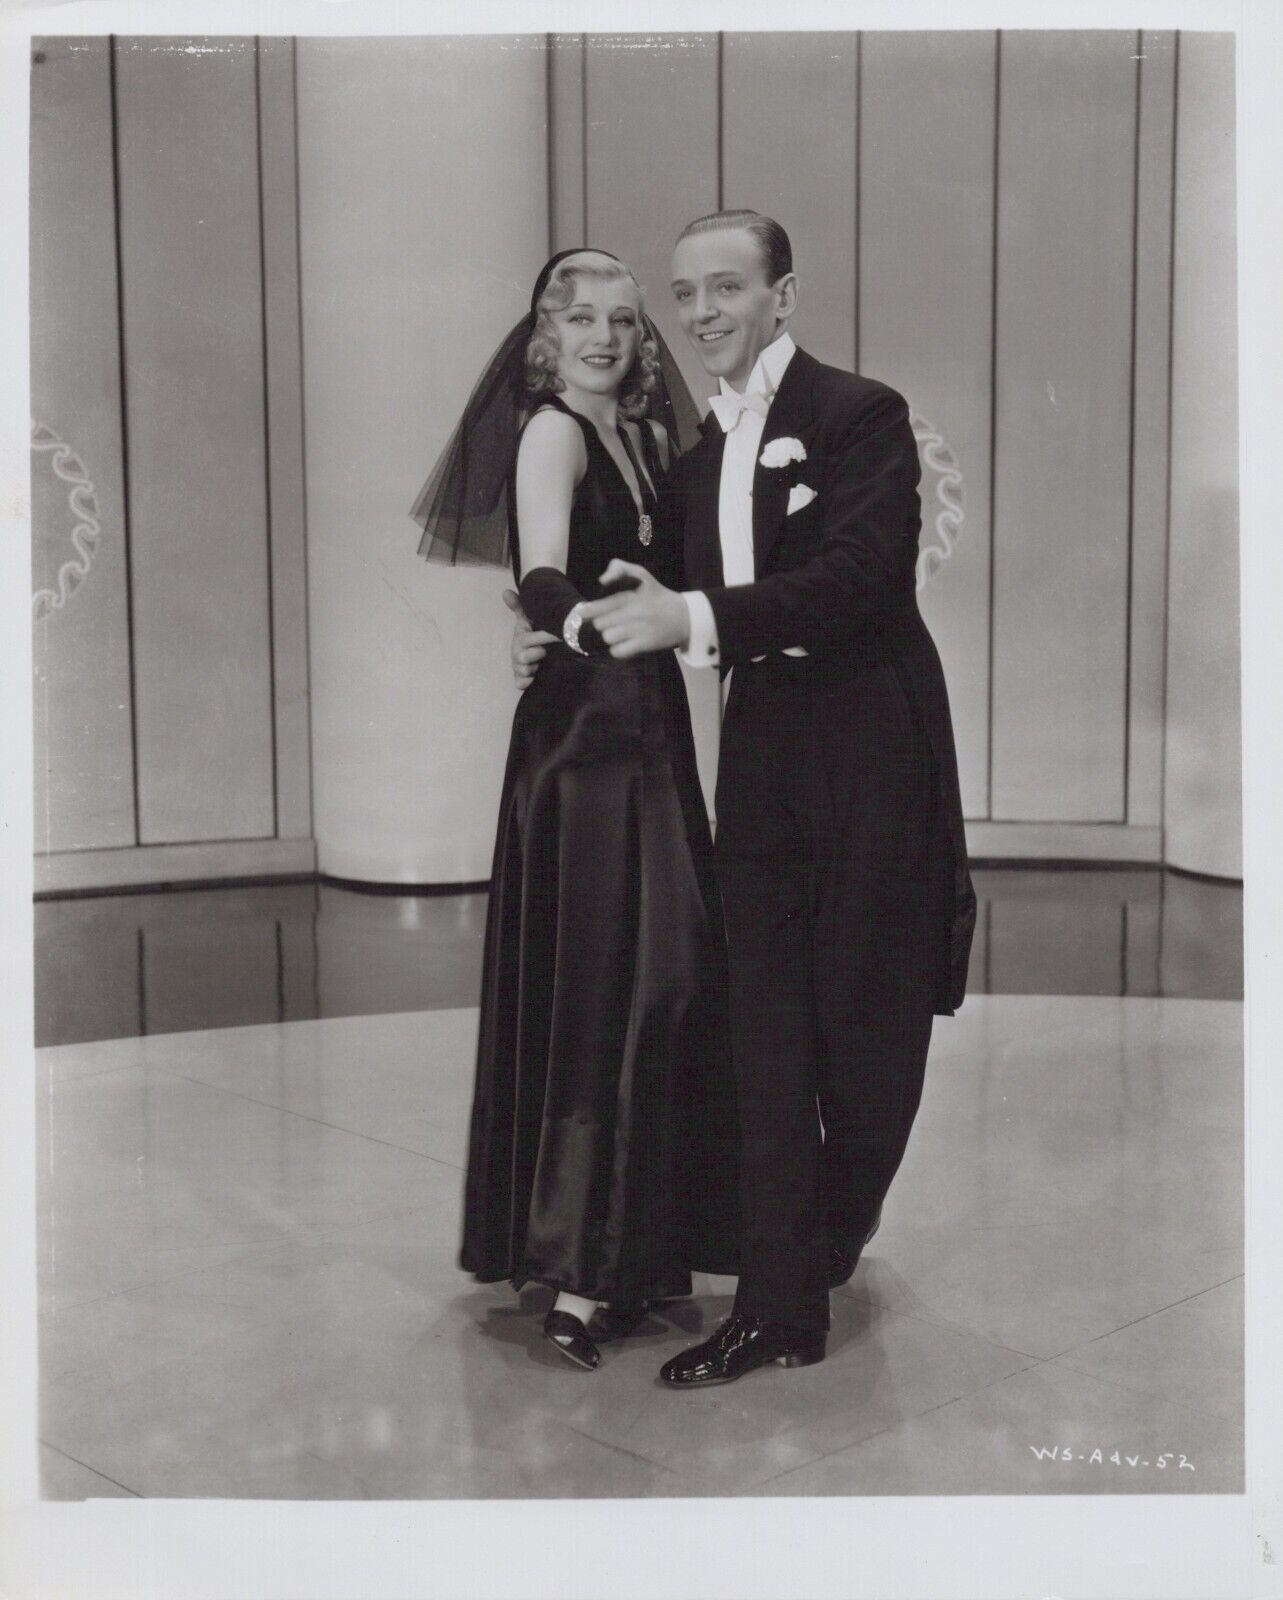 HOLLYWOOD BEAUTY GINGER ROGERS + FRED ASTAIRE PORTRAIT 1950s VINTAGE Photo C38